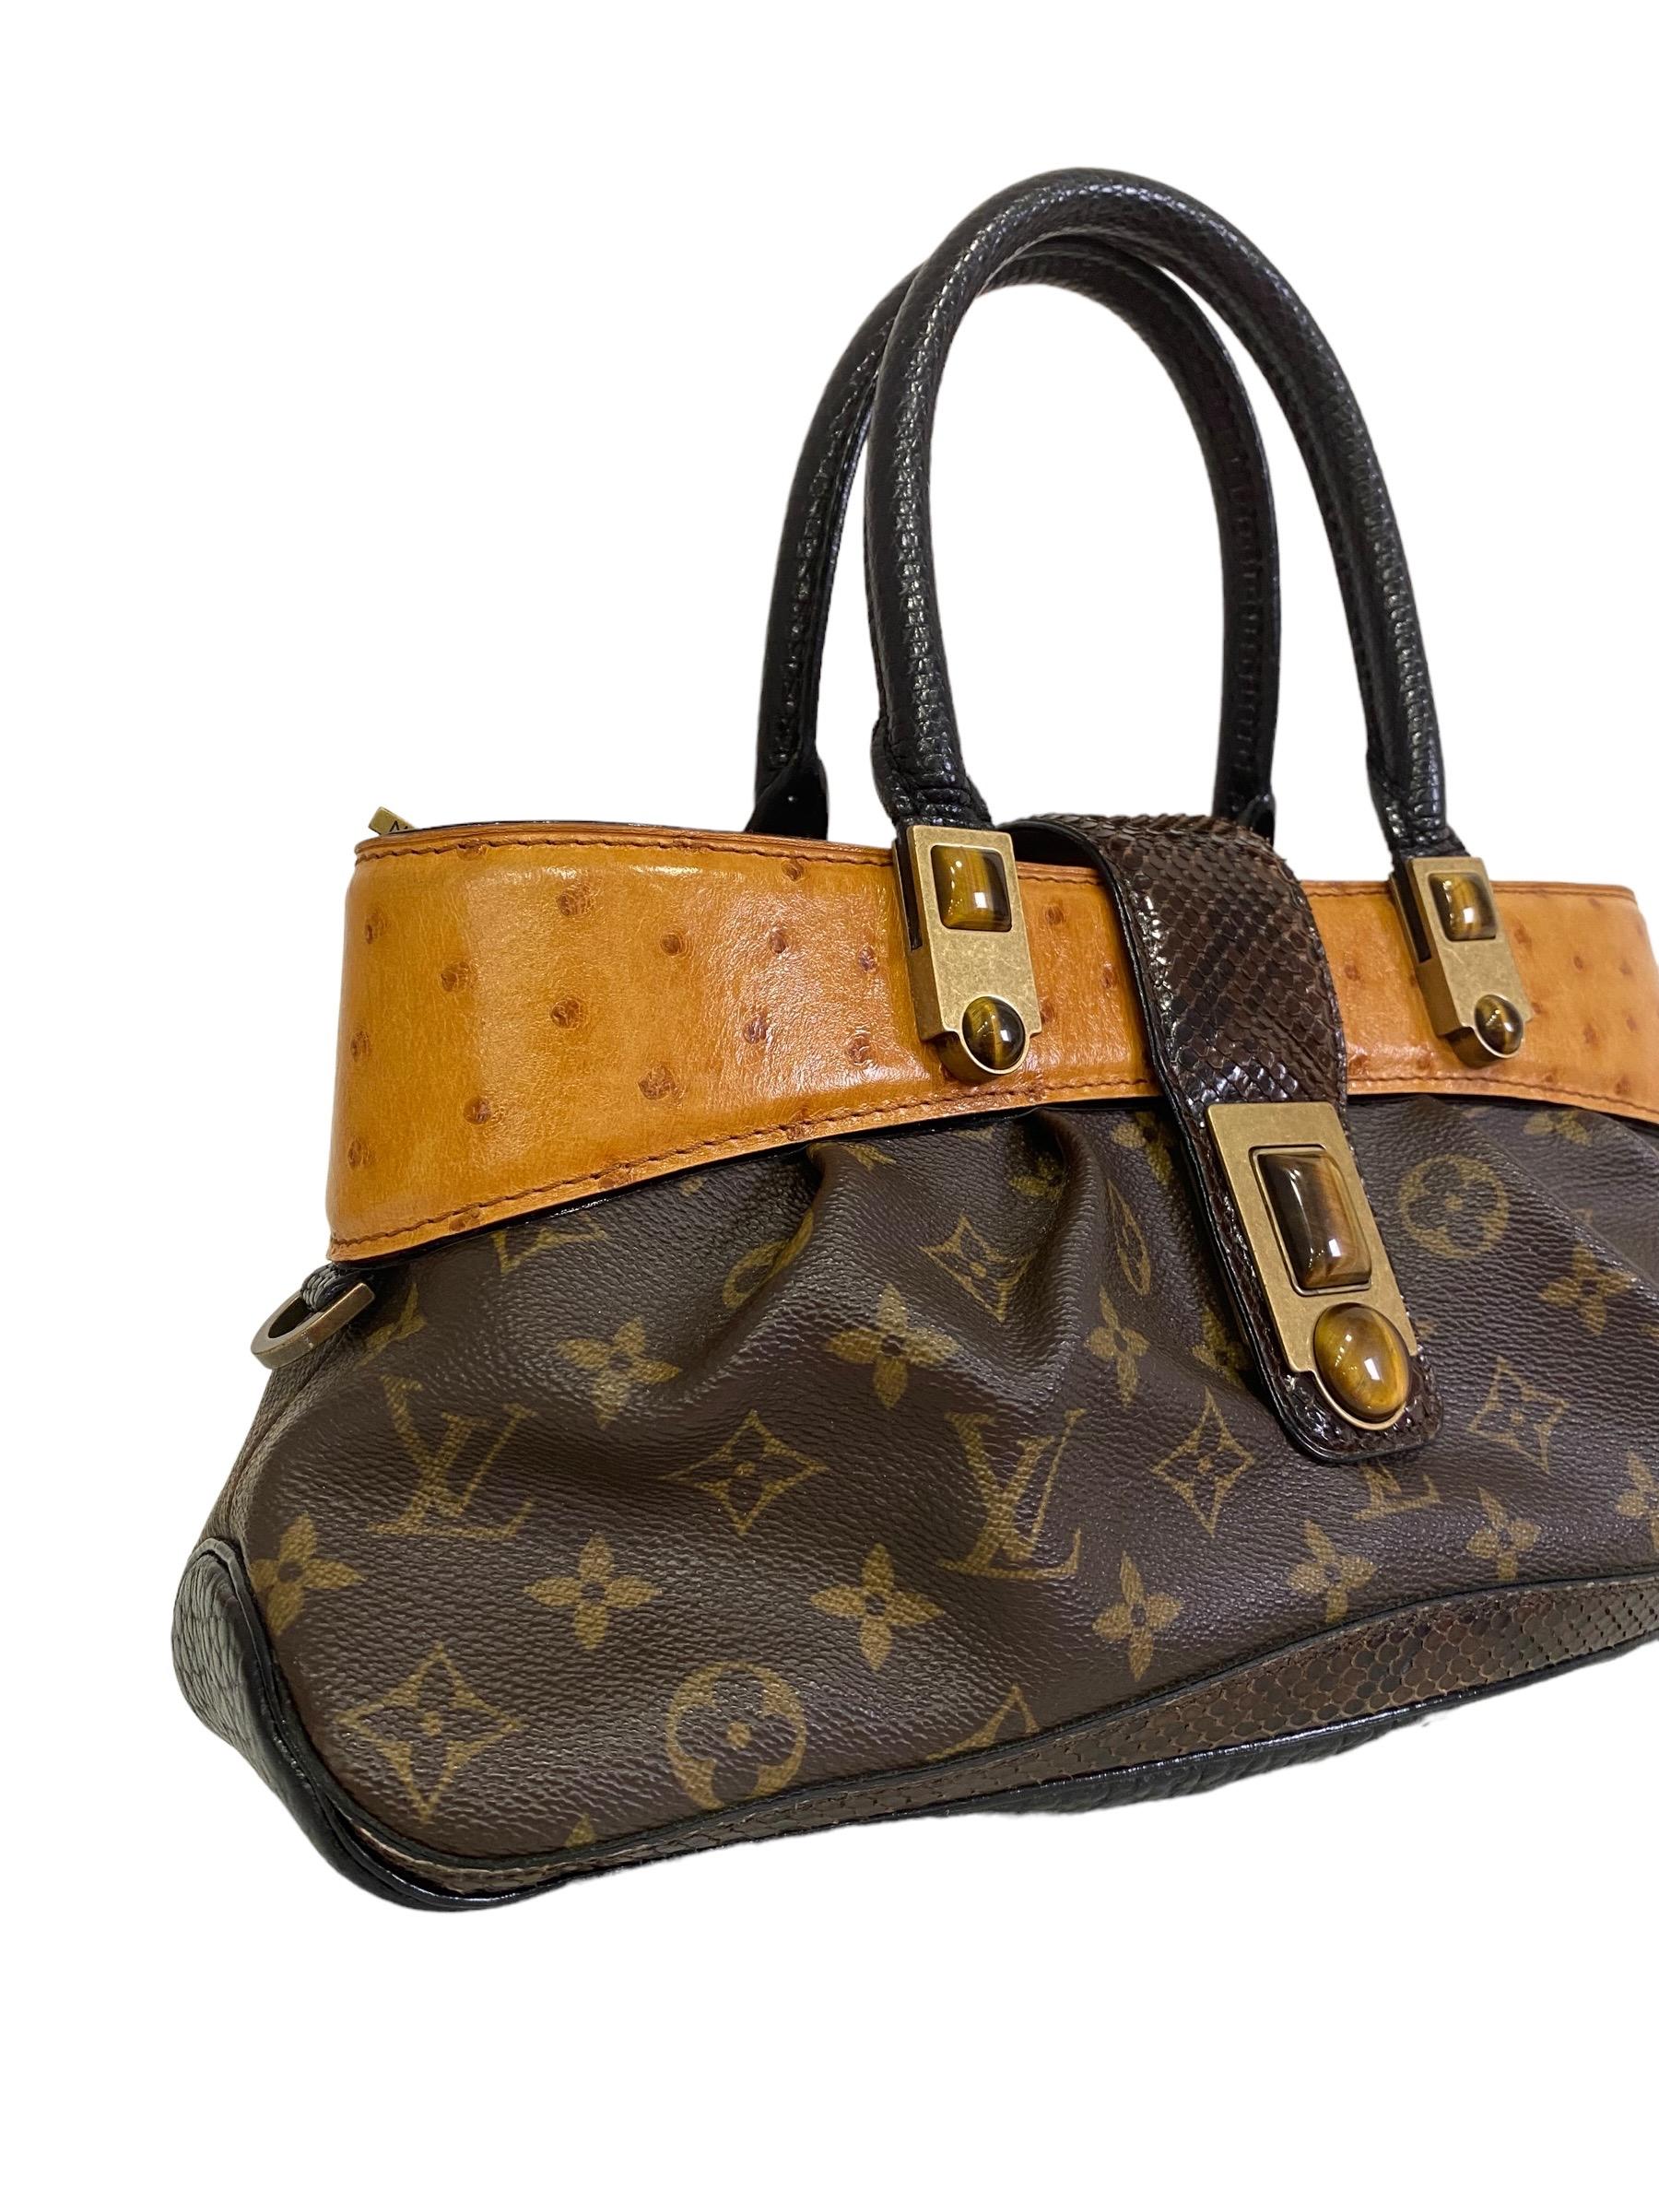 Louis Vuitton signed bag limited edition autumn/winter 2005 Tigereye in collaboration with Marc Jacobs

Combined with precious exotic leathers: ostrich, python and lizard.

Opening adorned with semi-precious tiger’s eye cabochons with brushed